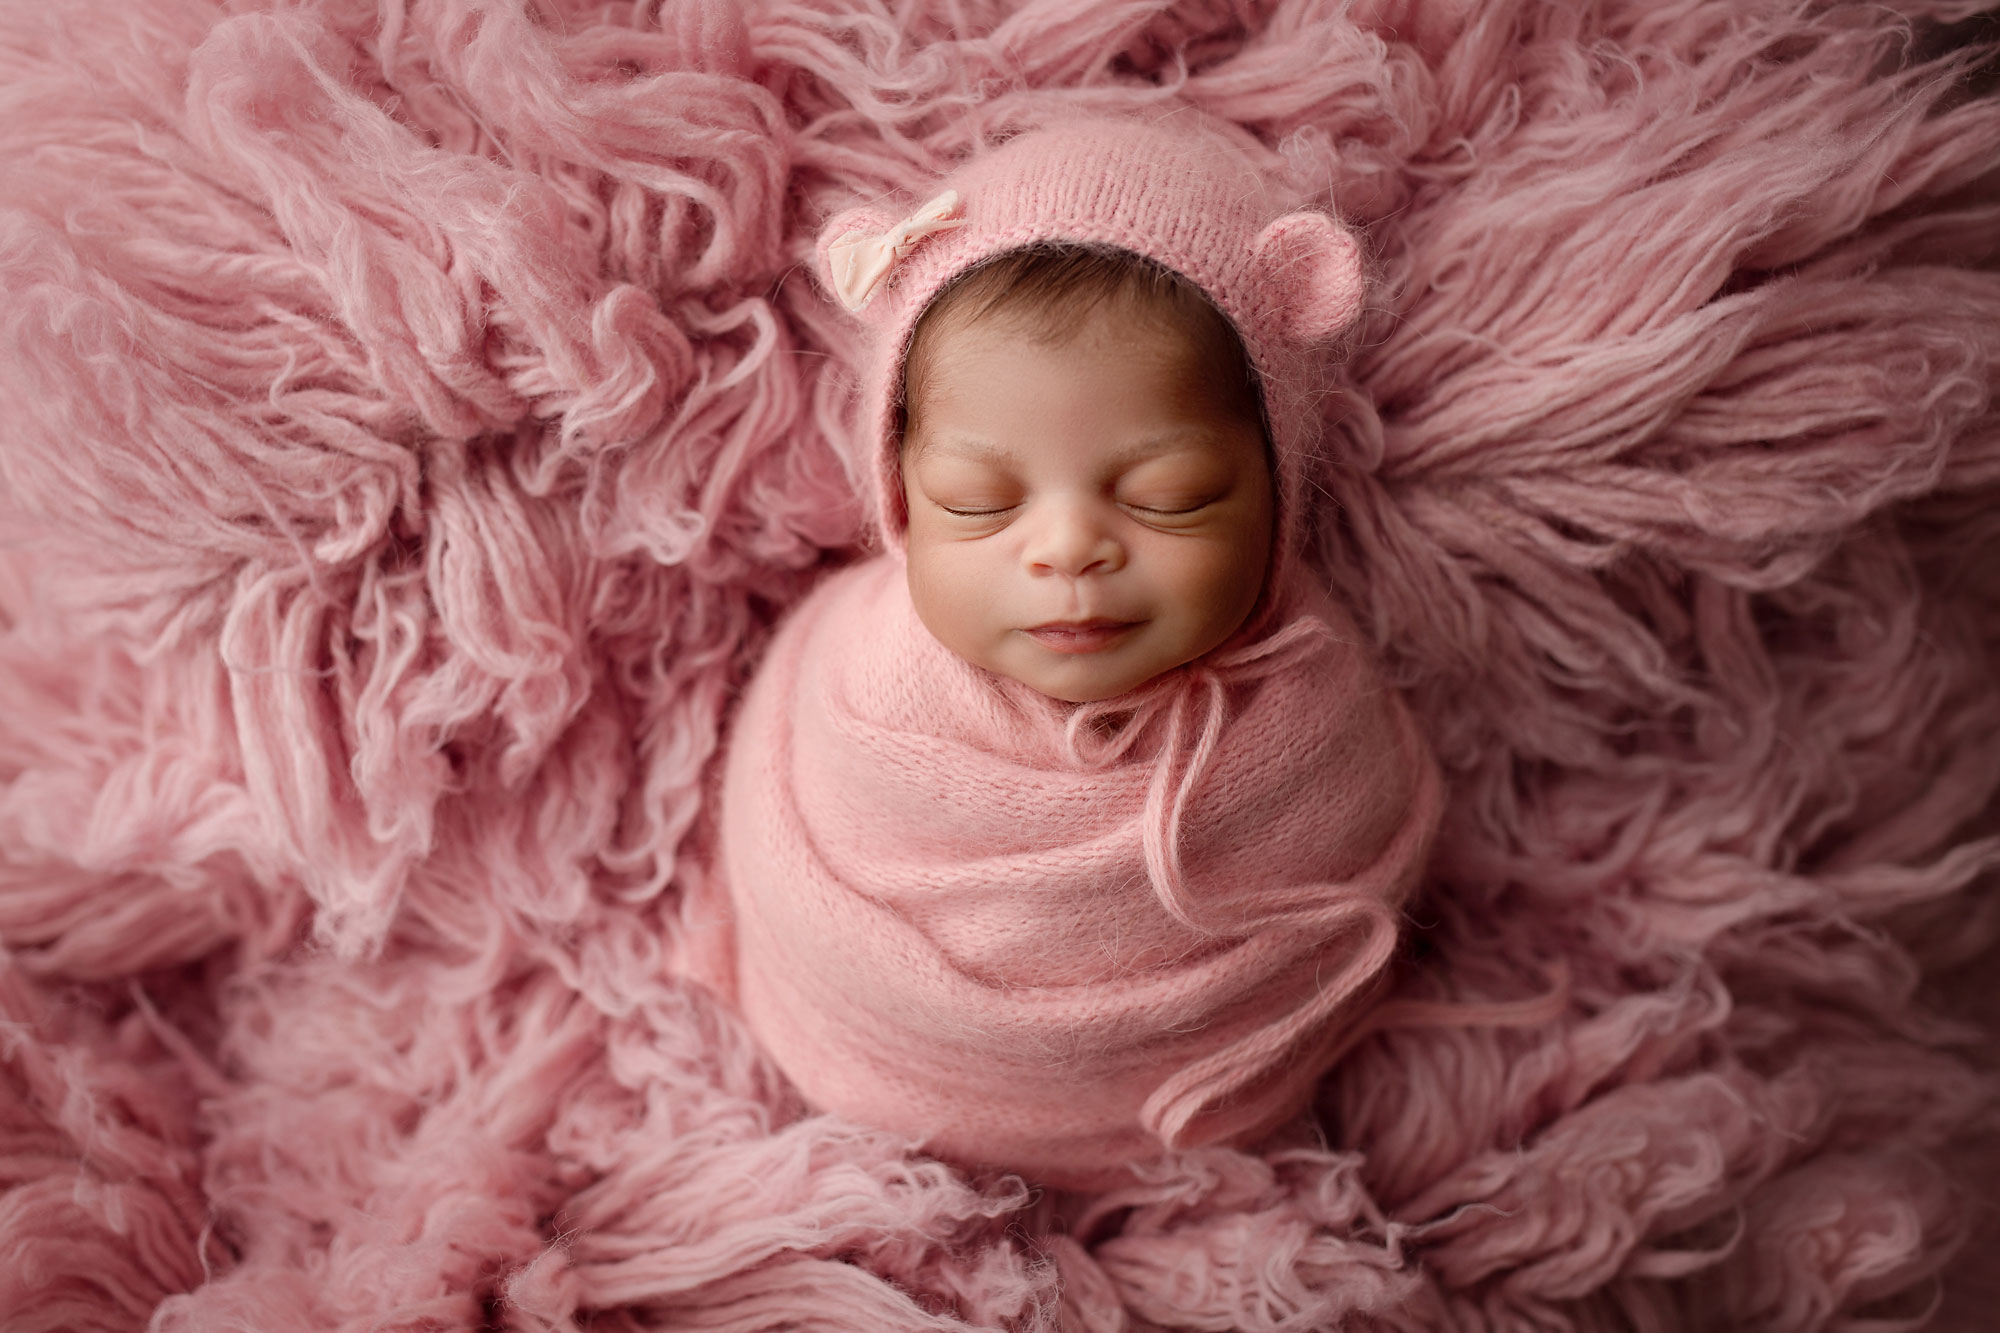 newborn photos woodbridge nj, smiling baby girl asleep in pink swaddle and bear hat with bow